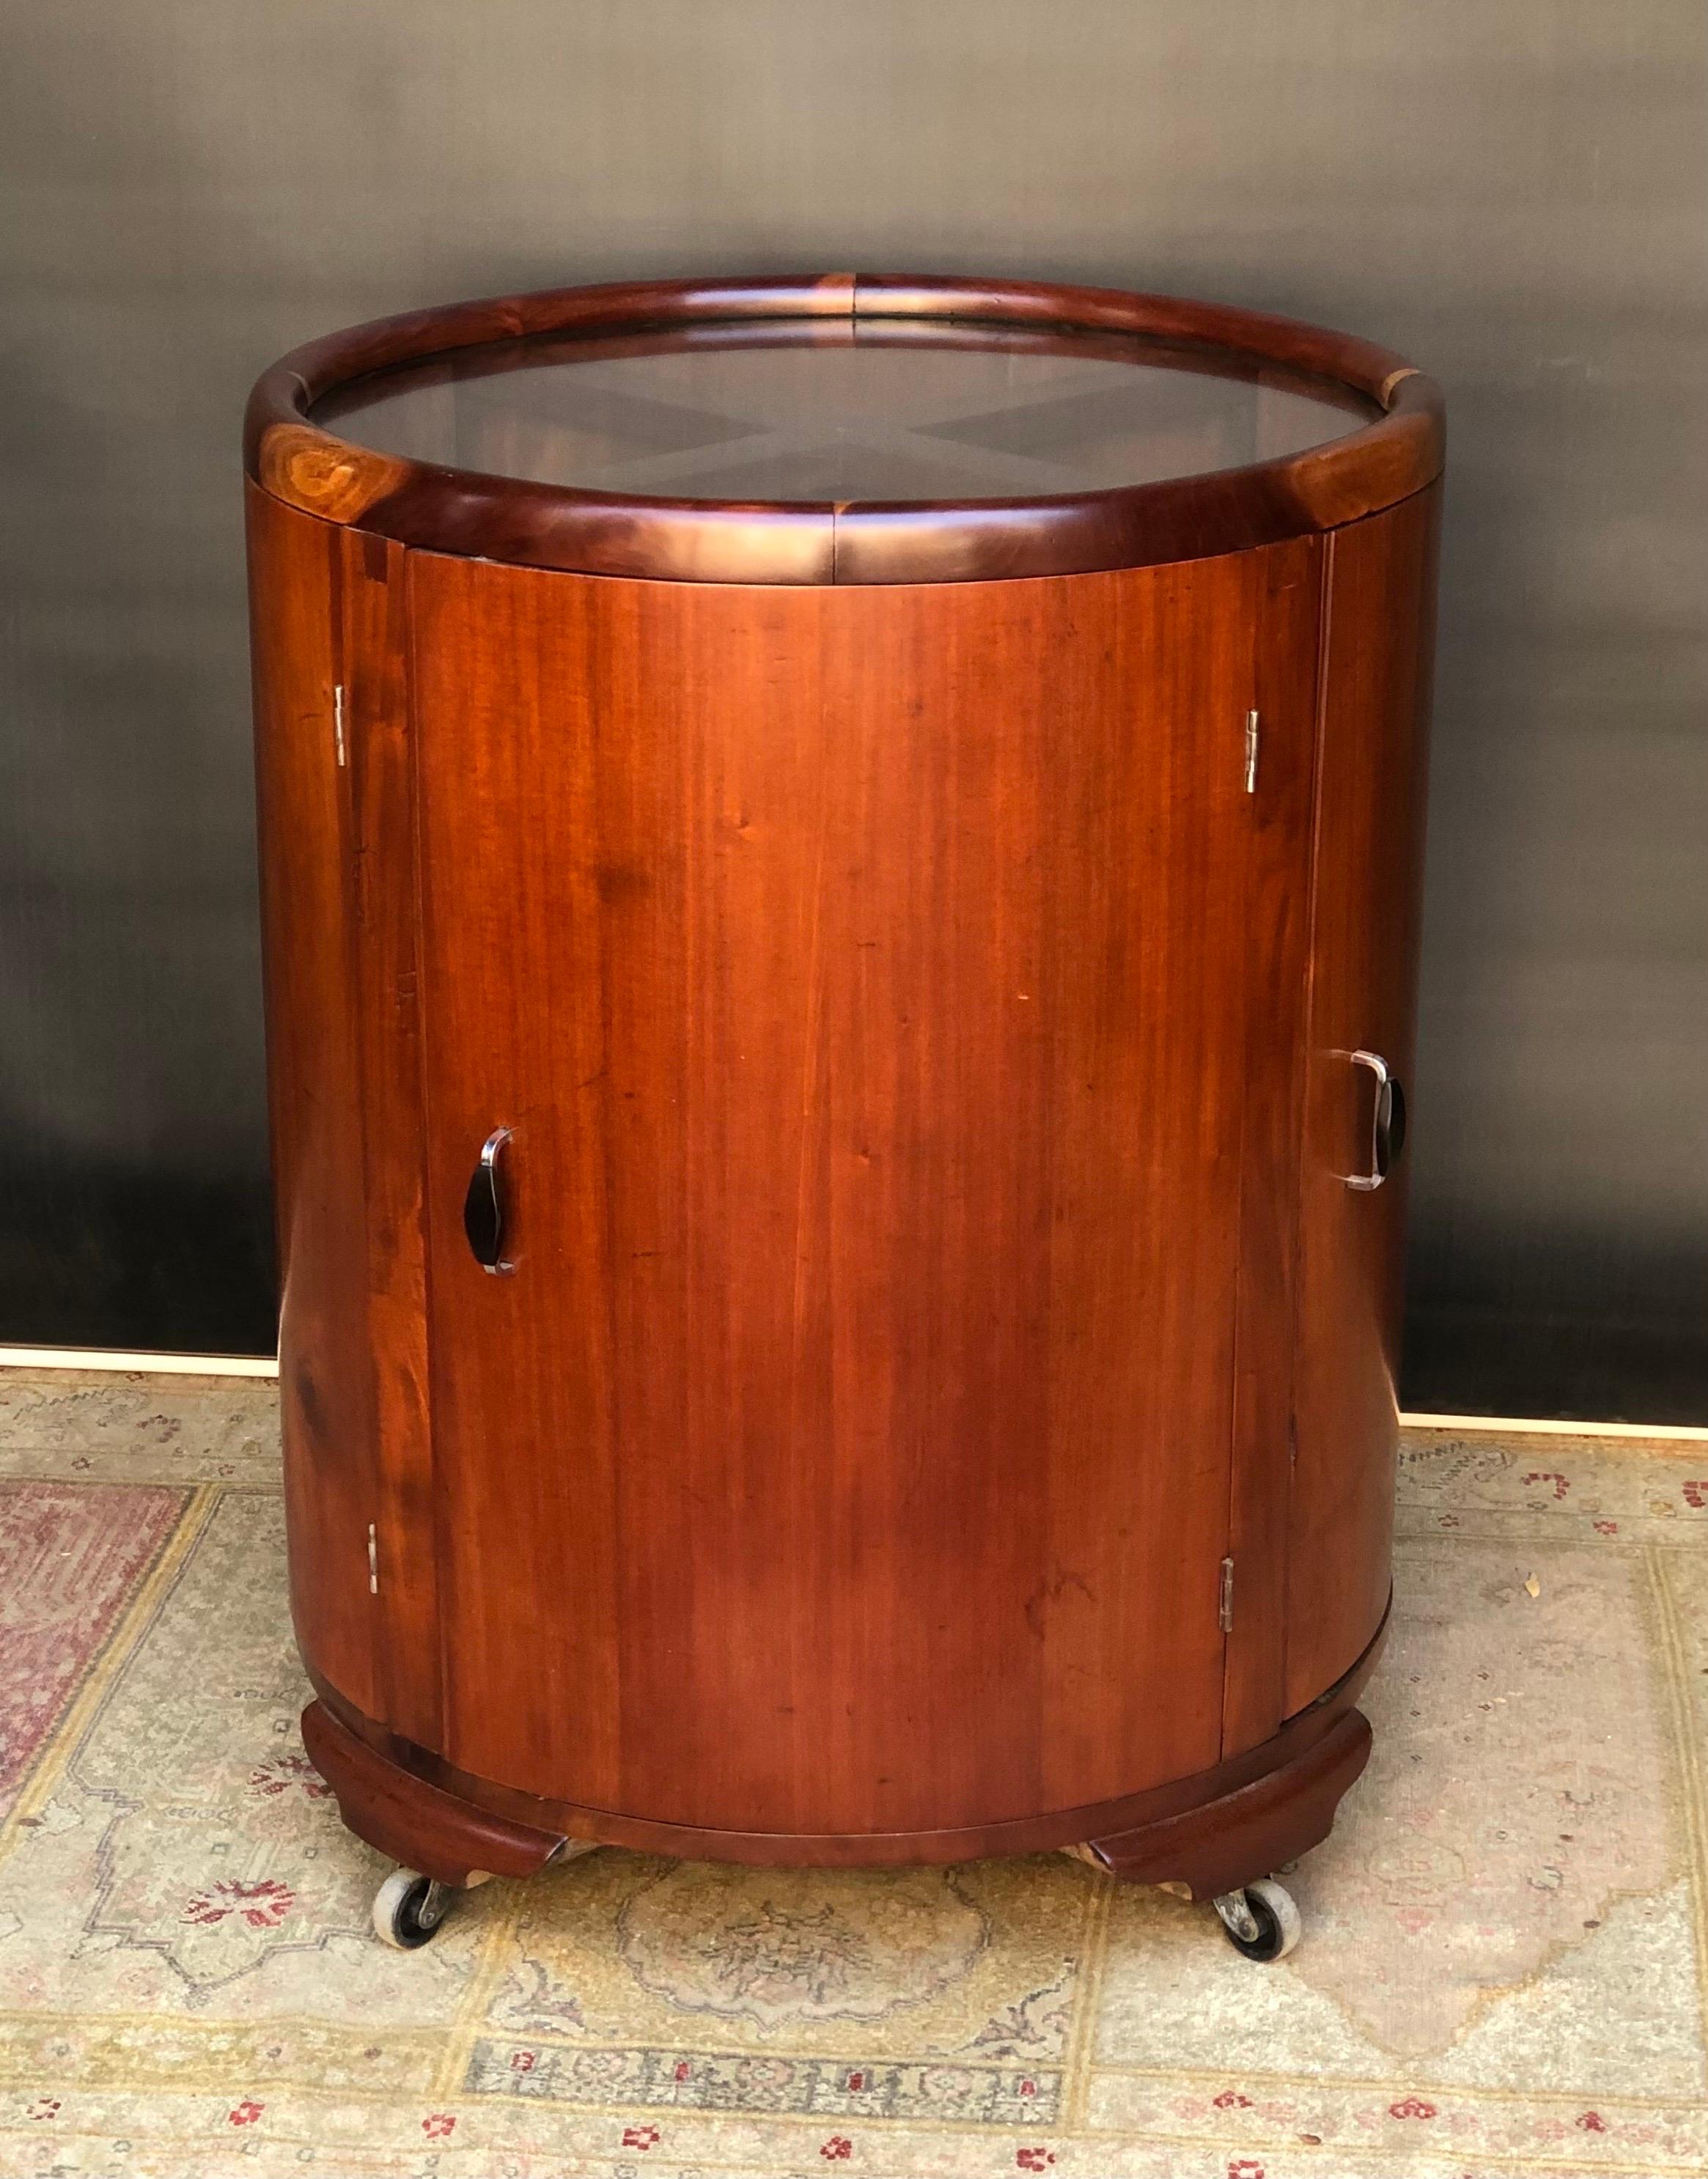 Jamaican Art Deco Round Bar/Cocktail Cabinet By Burnett Webster(circa.1934-1939) For Sale 12